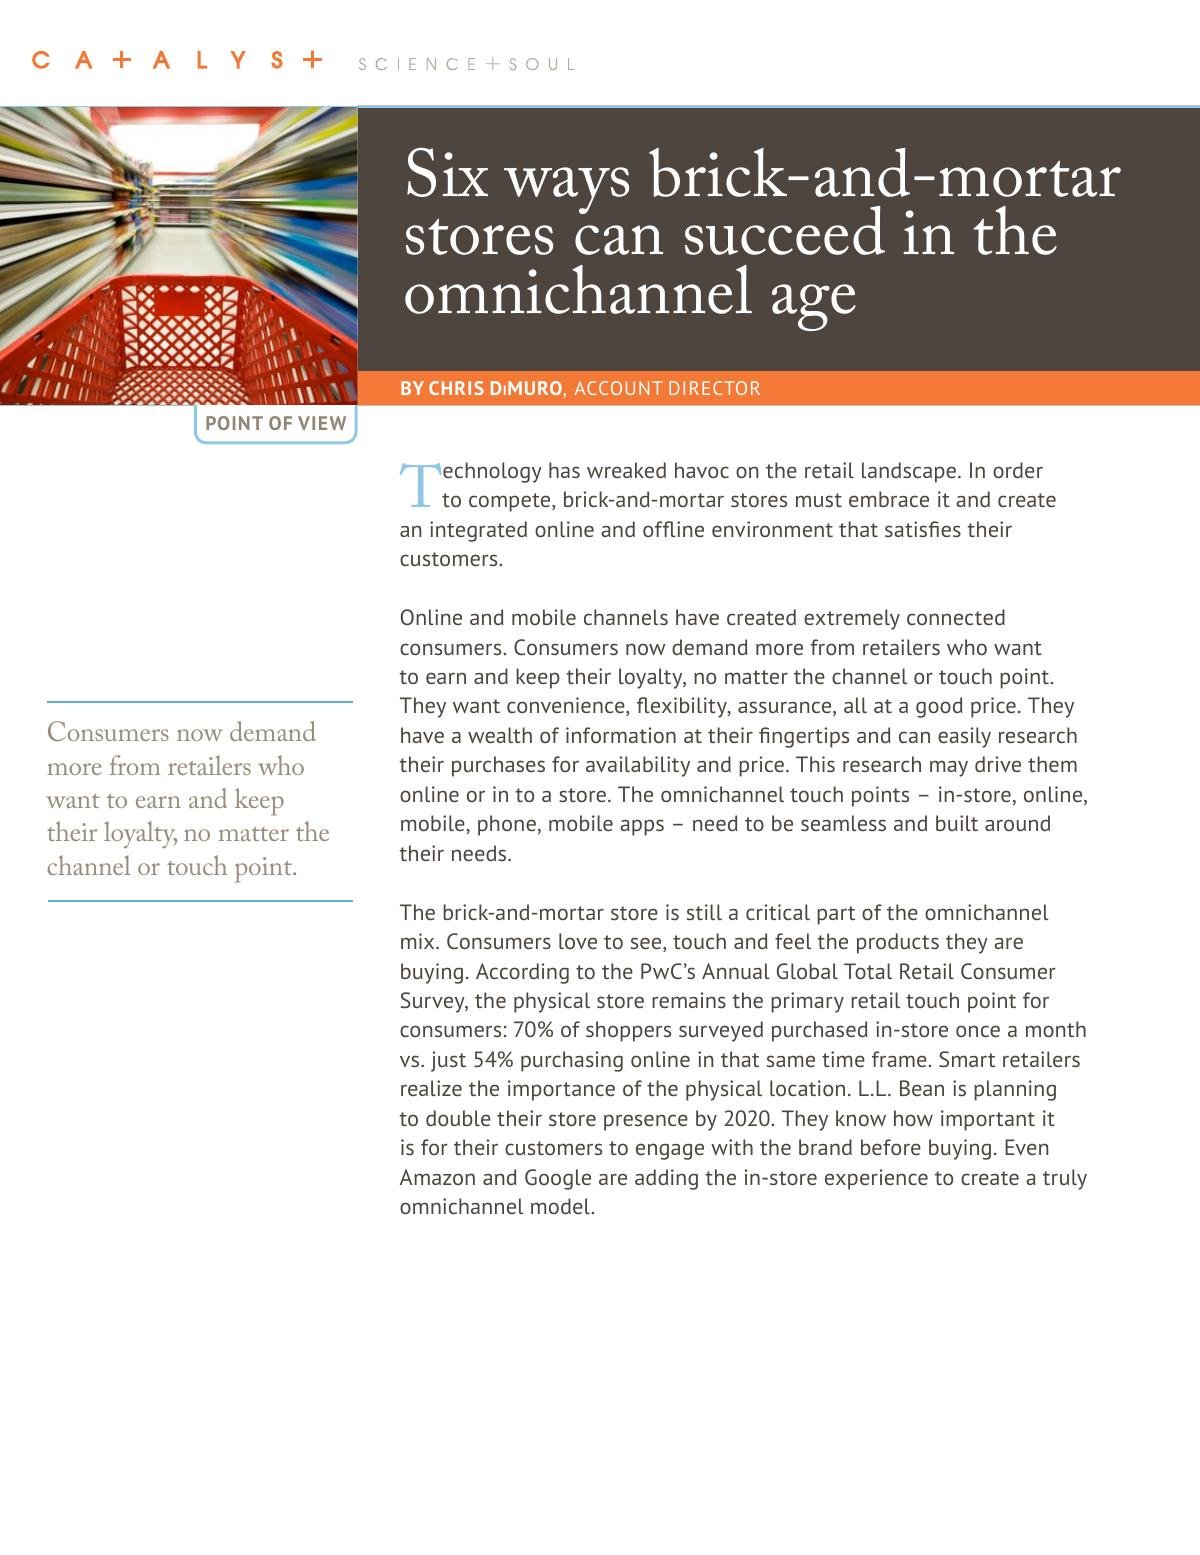 6 ways brick & mortar stores can succeed in the omnichannel age